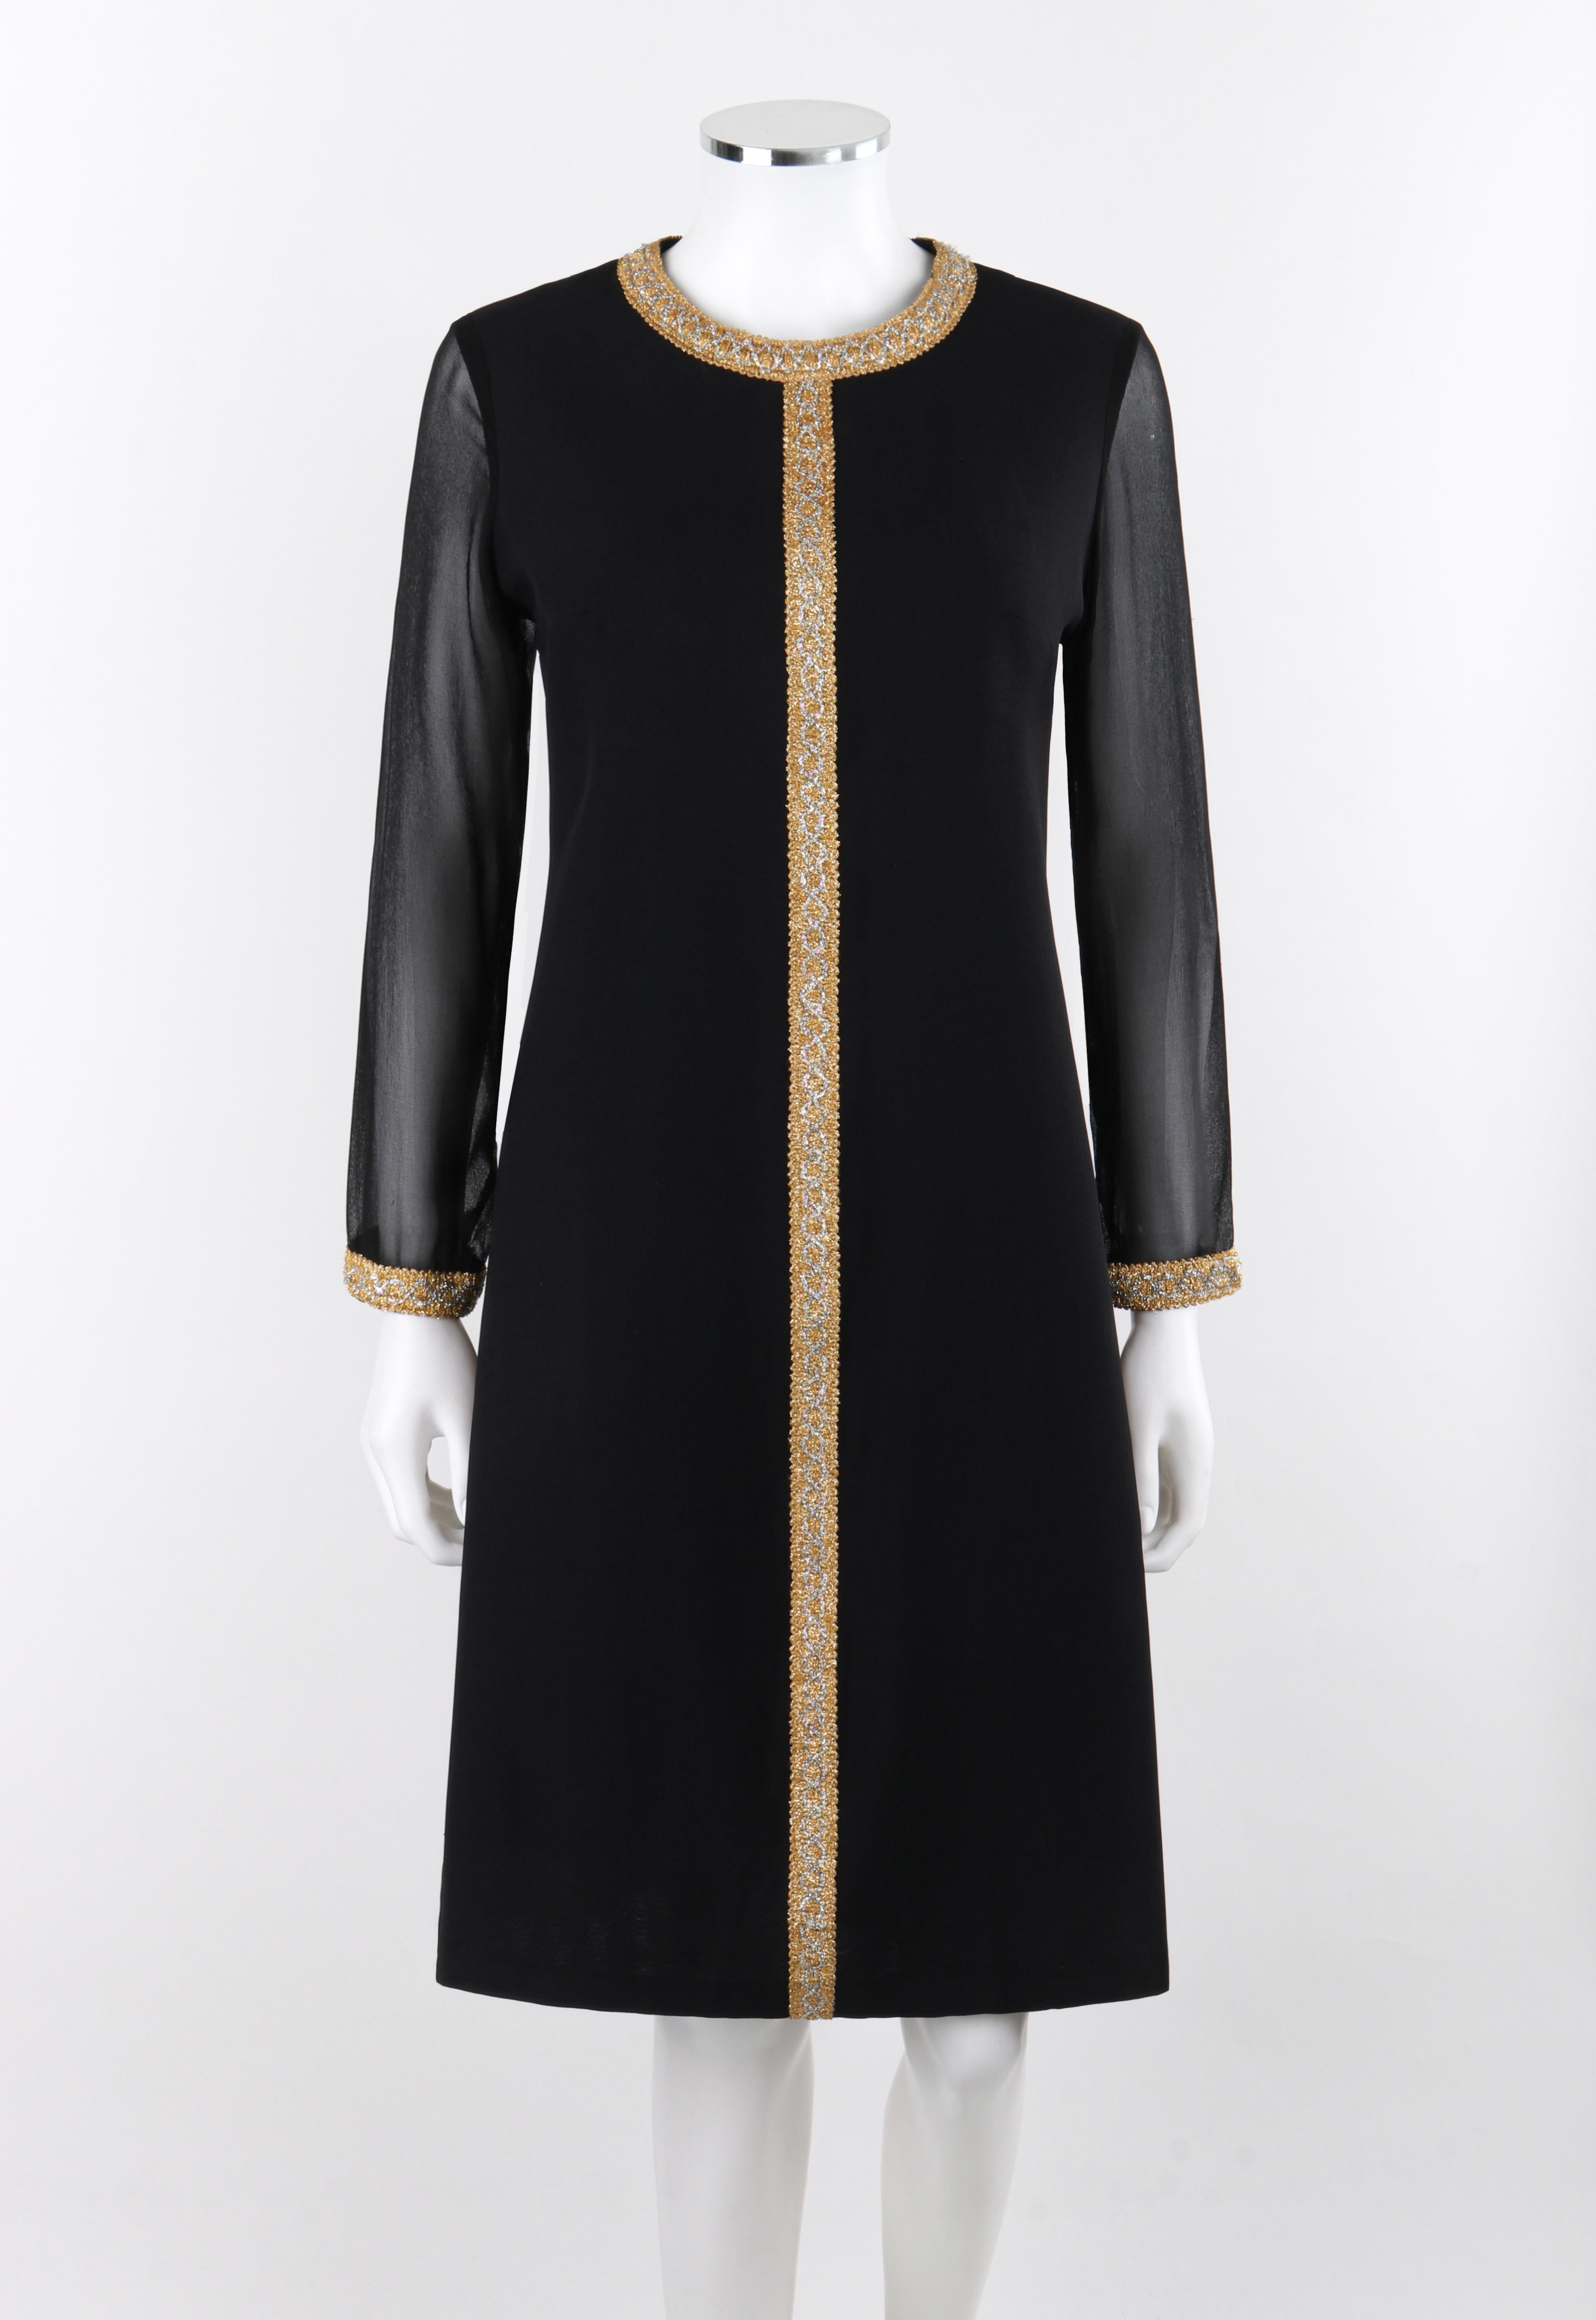 GLORIA SWANSON Puritan Forever Young c. 1960's Black Gold Sheer Sleeve Dress VTG

Brand / Manufacturer: Puritan Forever Young
Circa: 1960s
Designer: Gloria Swanson
Style: Cocktail Dress
Color(s): Black, Gold/silver (accents.)
Lined: No
Unmarked